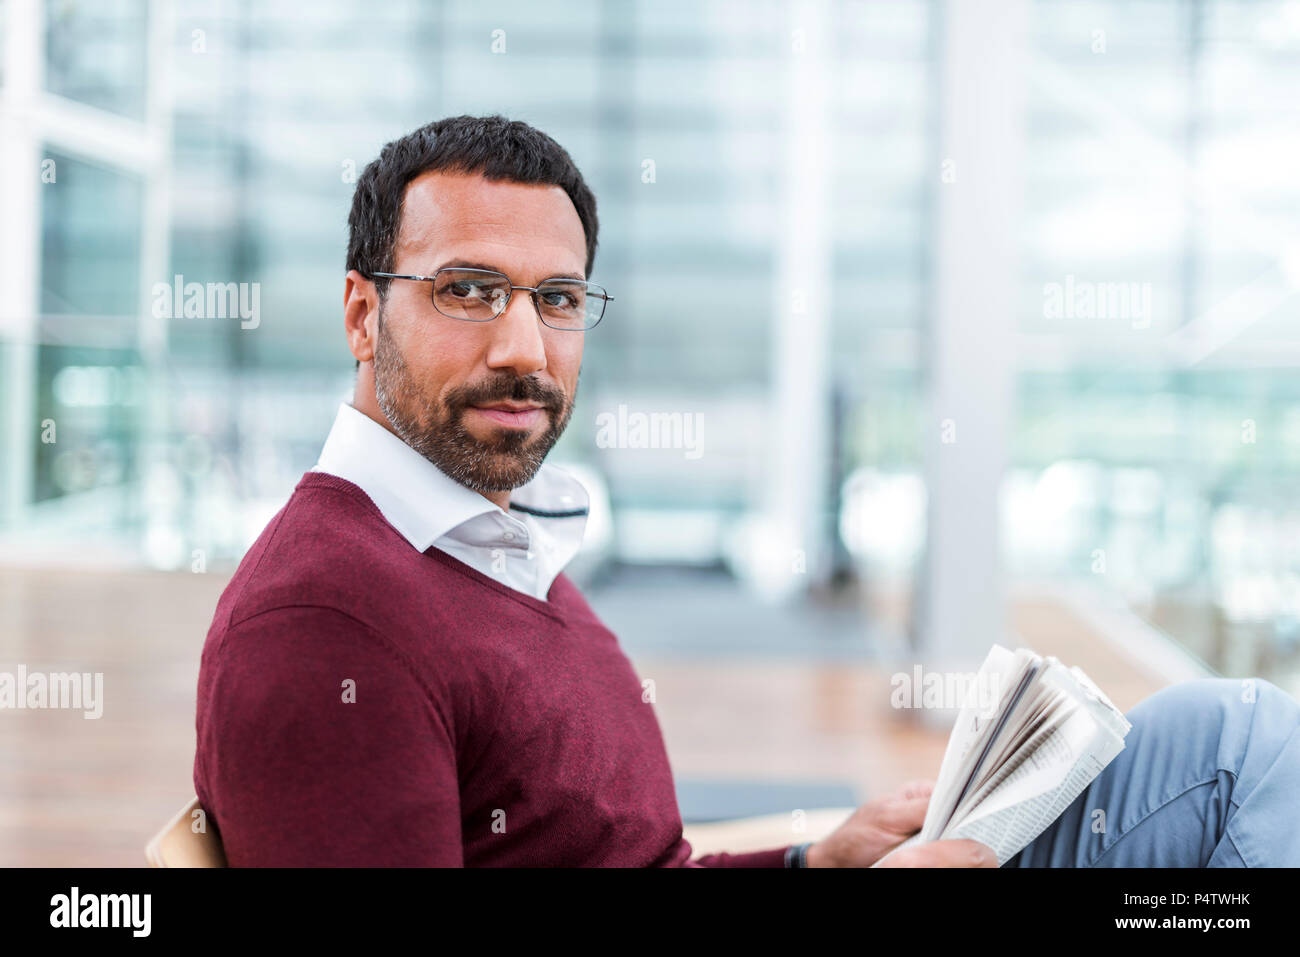 Businessman reading a newspaper in waiting hall Stock Photo